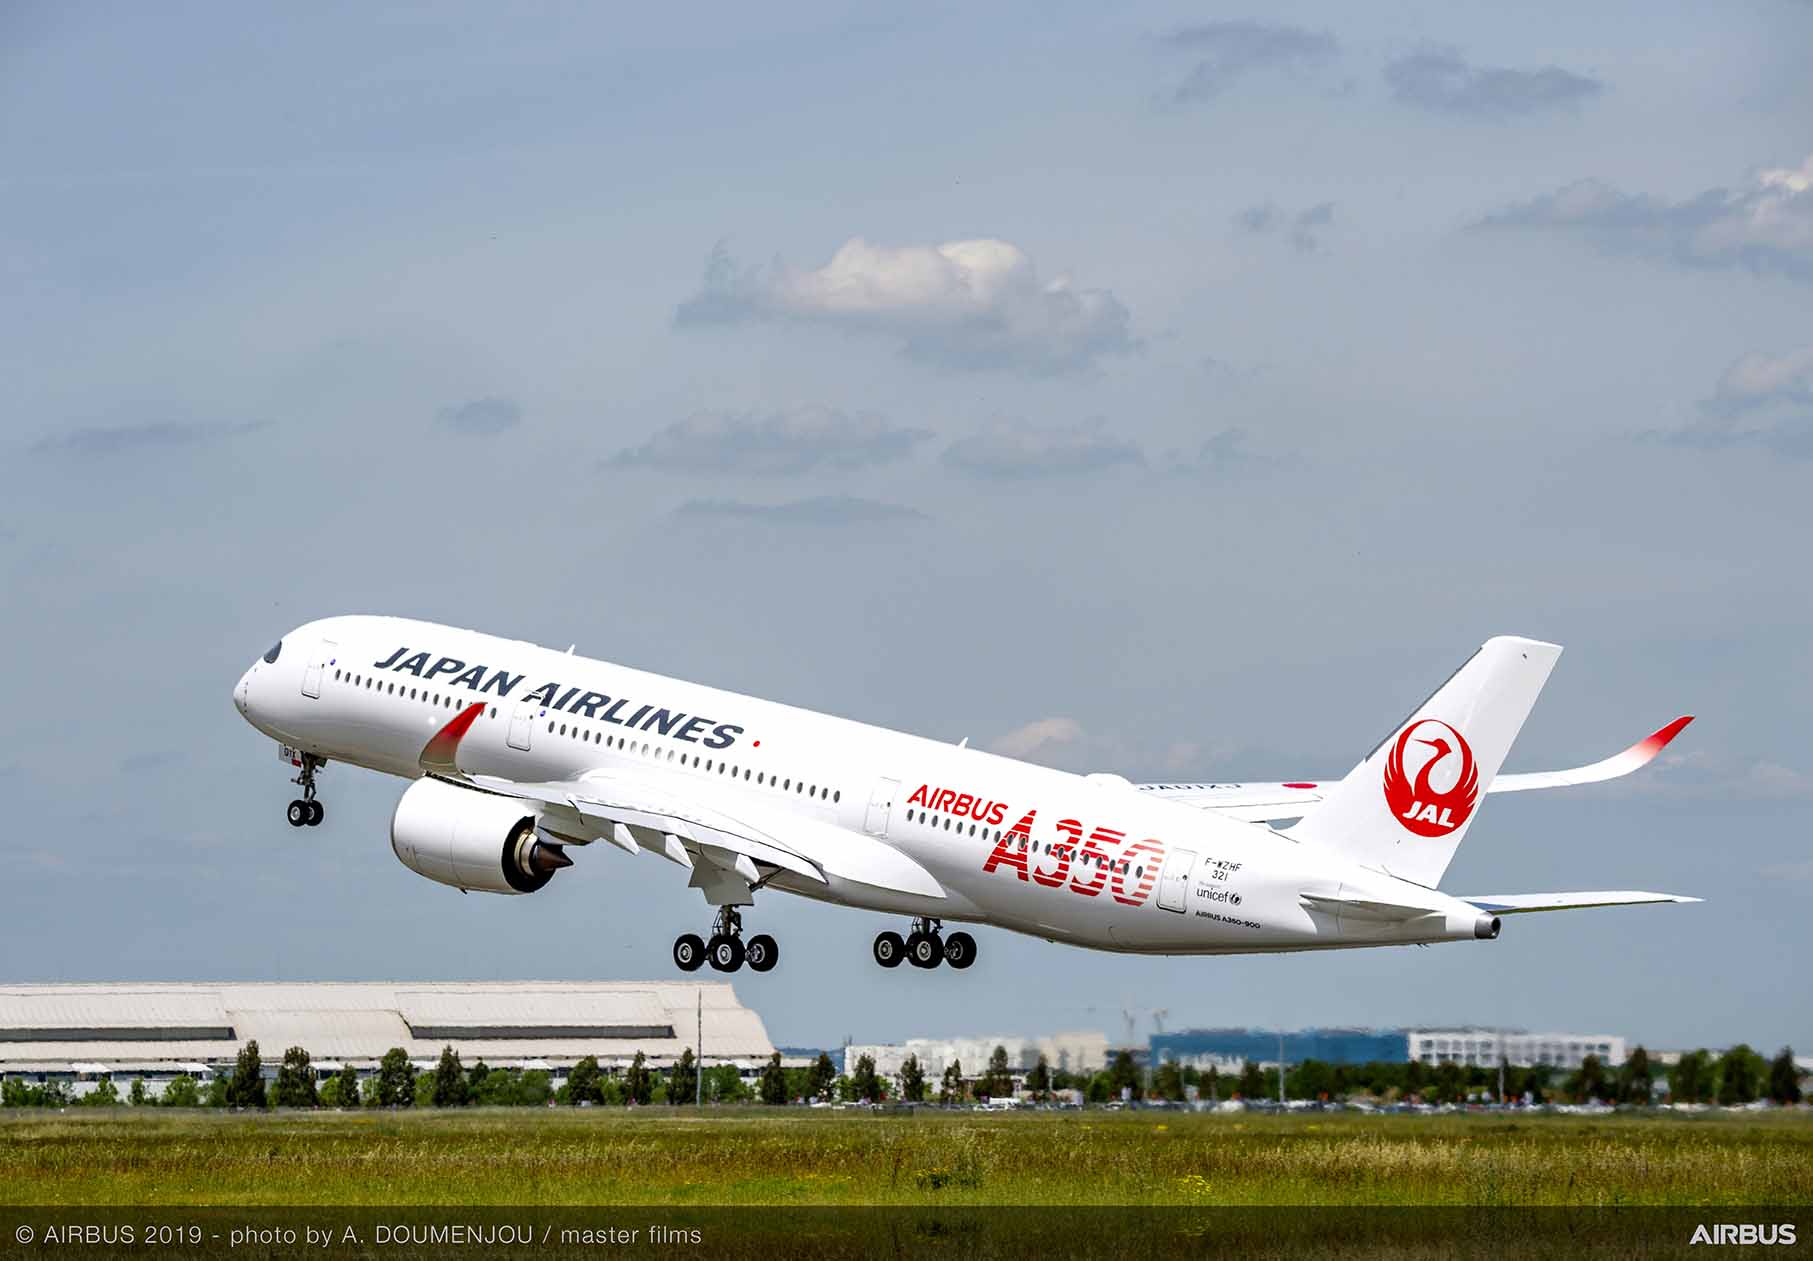 Japan Airlines invests in REGENT’s seaglider technology for sustainable transportation